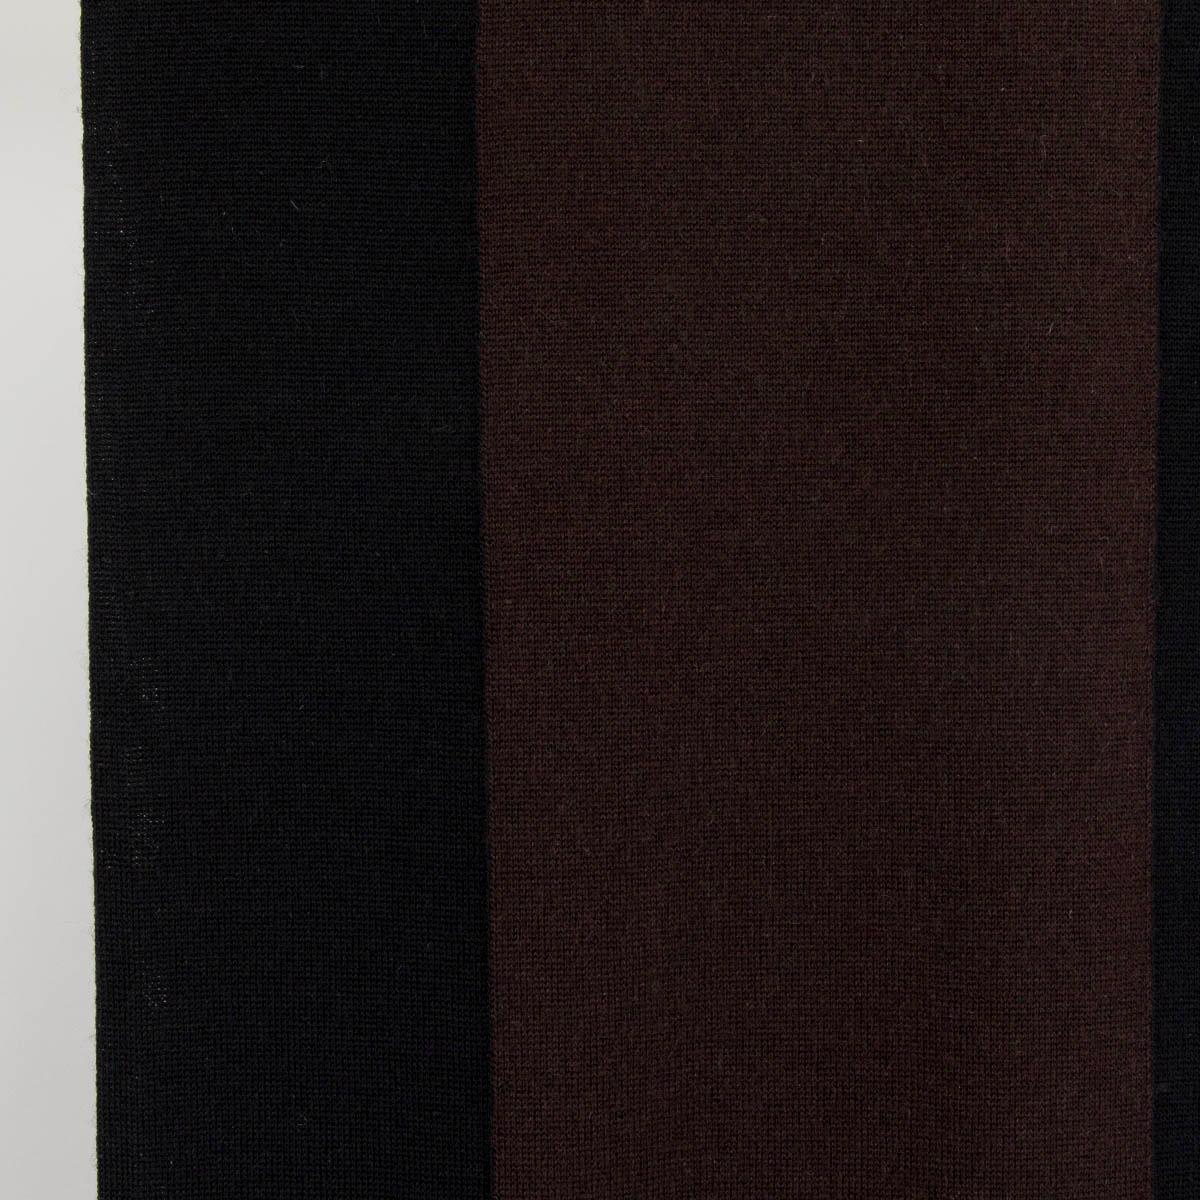 100% authentic Hermès jersey muffler in black and espresso brown cashmere (50%) and wool (50% - please note the content tag is missing). One side has a stretched H in black with brown in between. The other side is completely black. Has been worn and